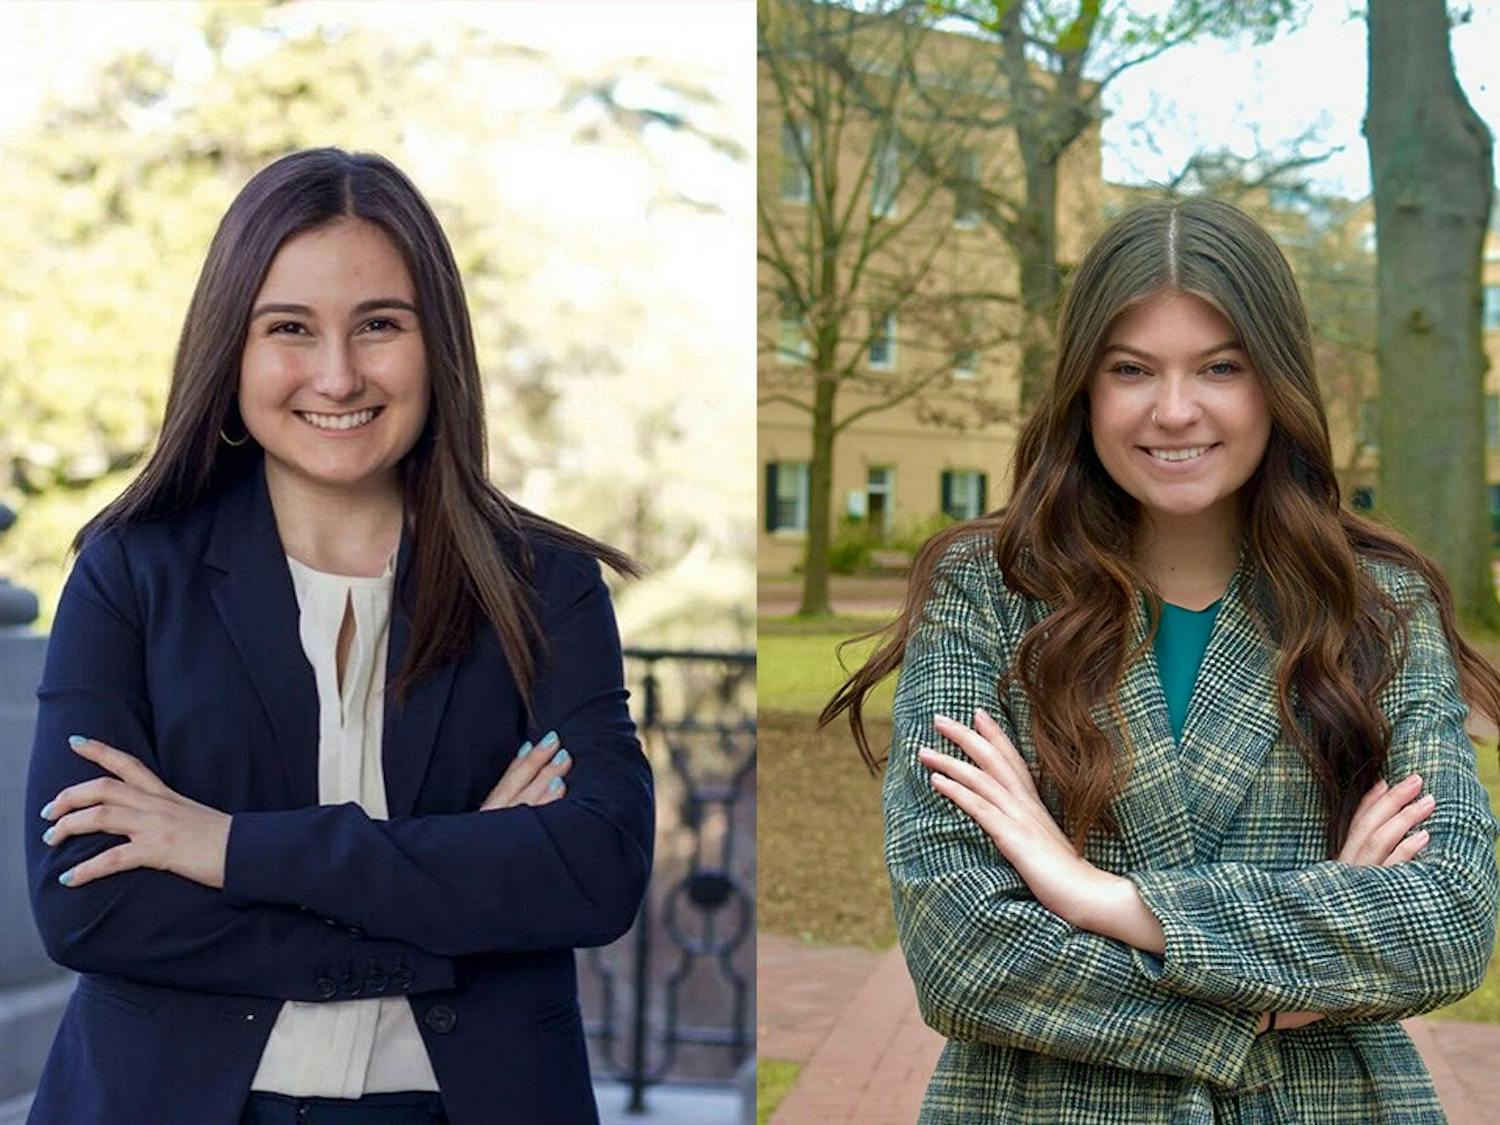 Maia Porzio (left) and Faith Gravley (right) are the candidates running to become the next Student Body Vice President. Students can vote for candidates from Feb. 22 at 9 a.m. to Feb. 23 at 5 p.m. Ballots will be available online.